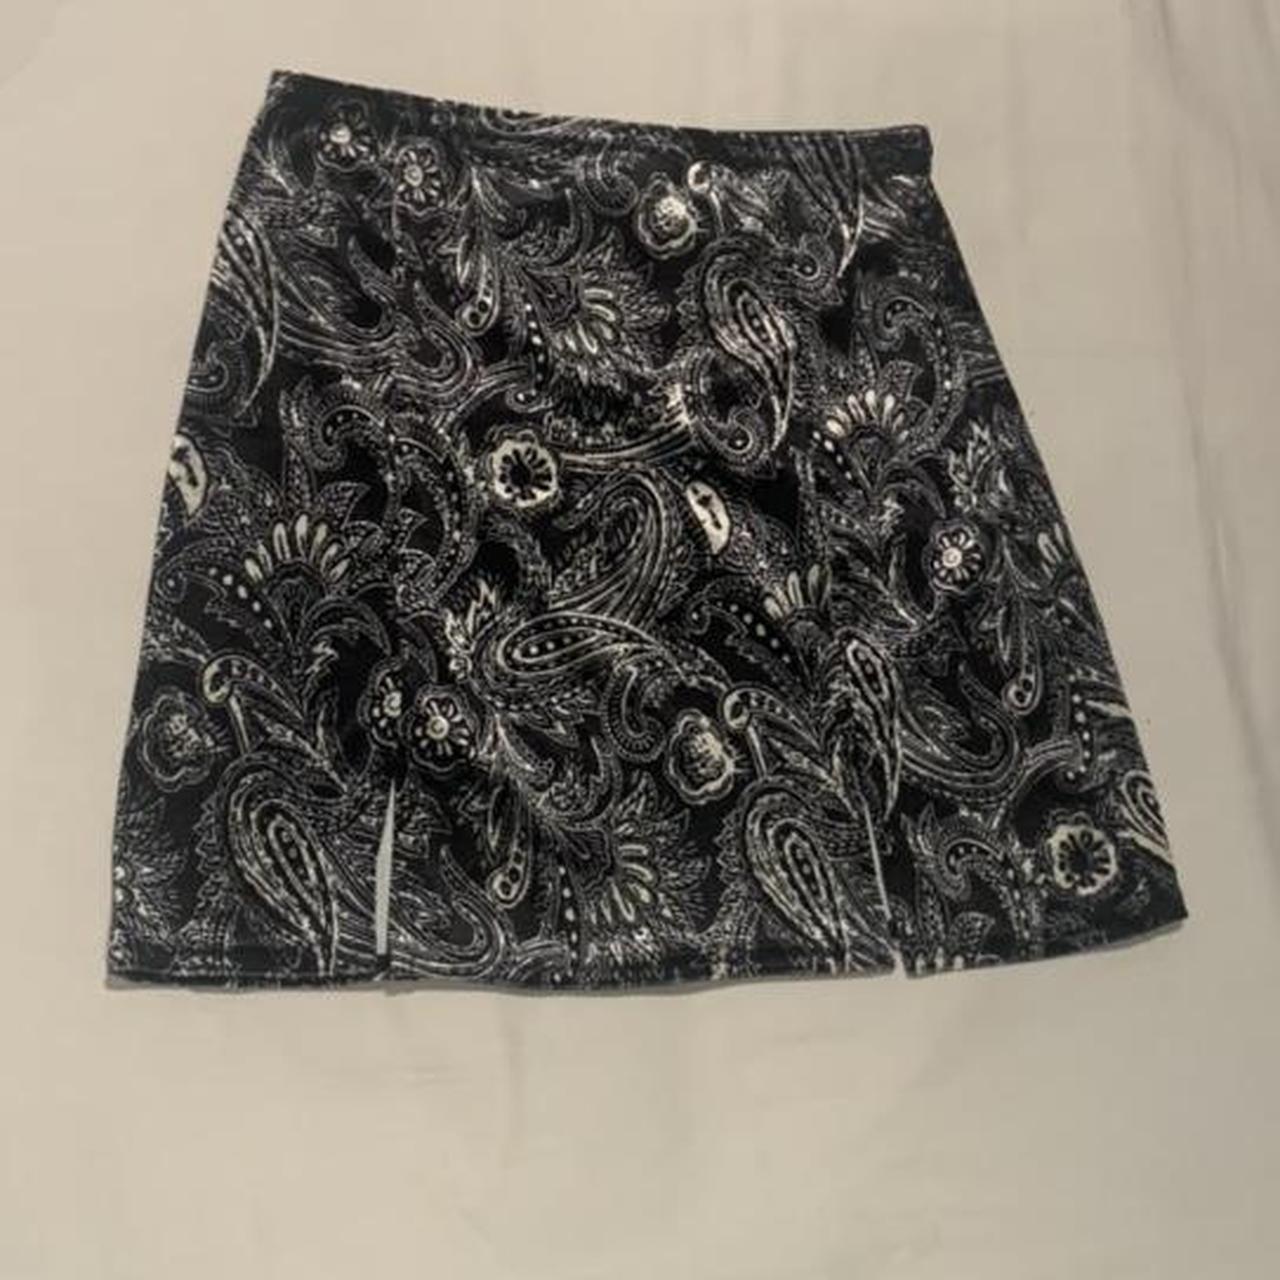 Please Message before buying! >Urban Outfitters... - Depop